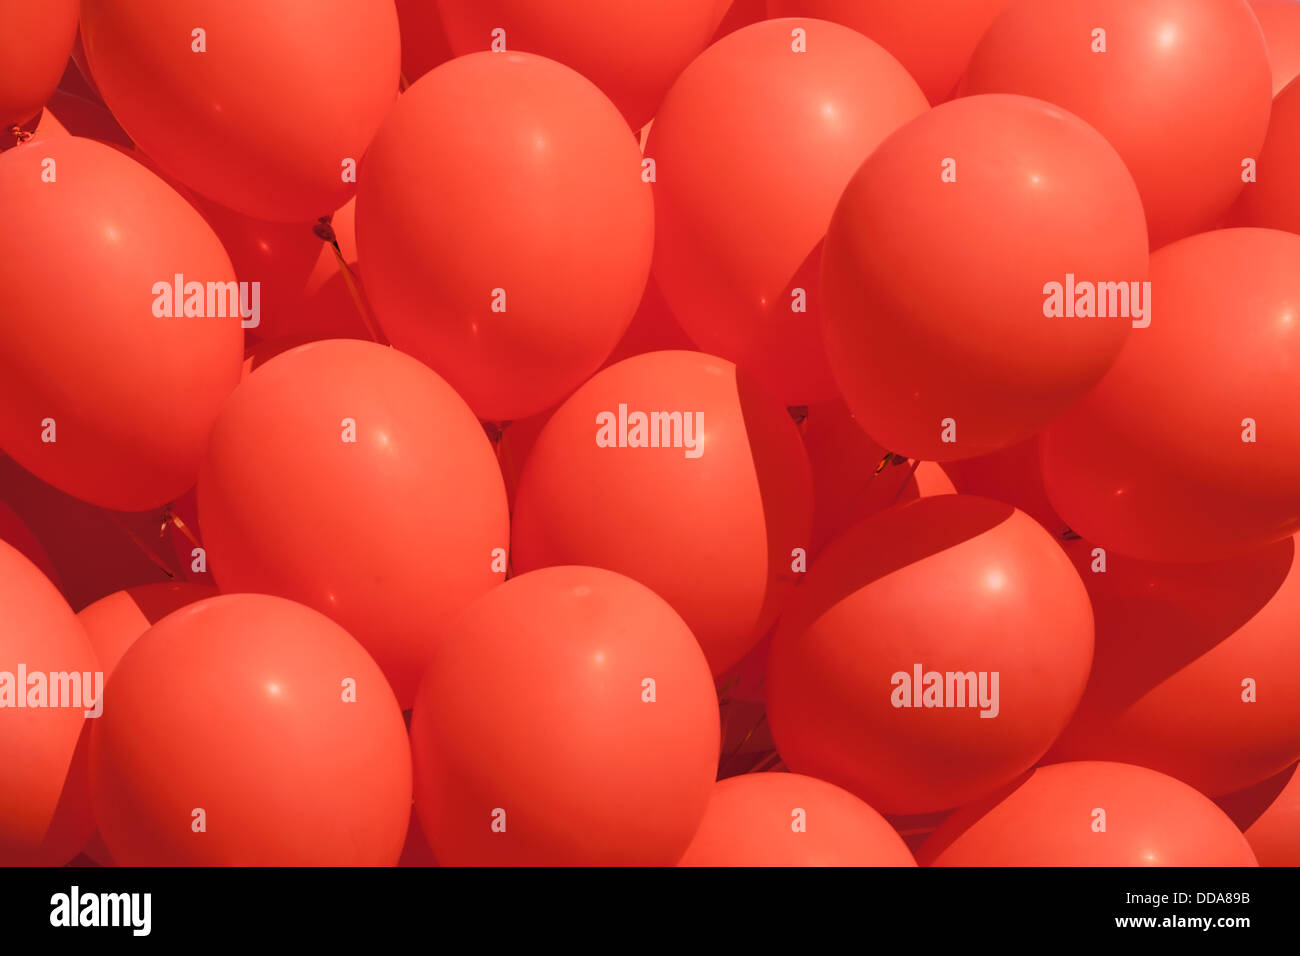 balloons red bunch full frame many Stock Photo